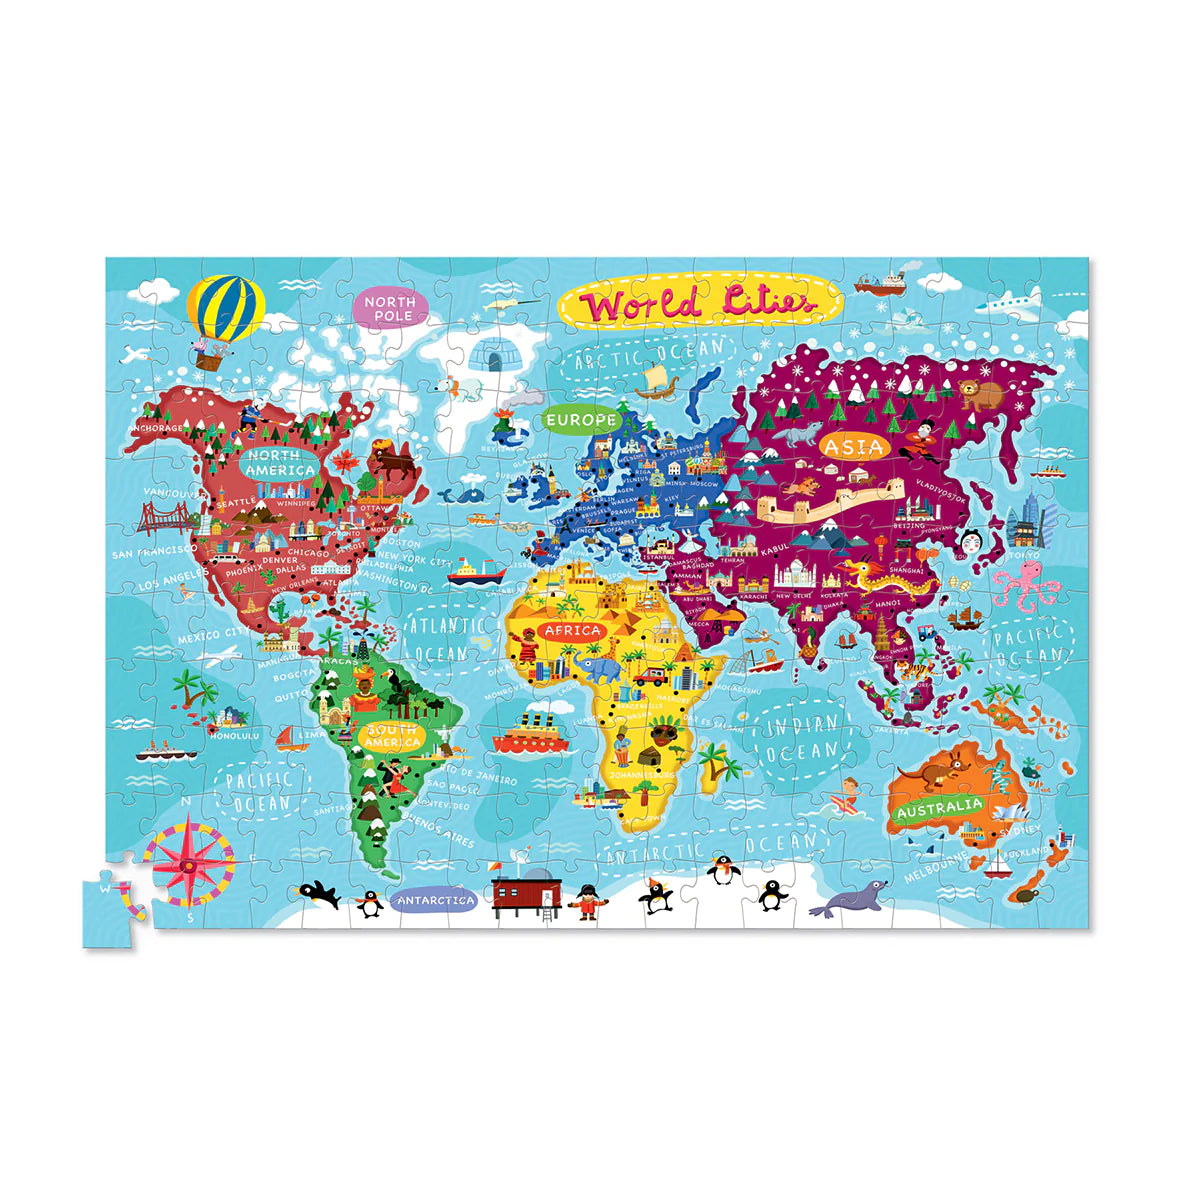 200-pc Puzzle+Poster - World Cities